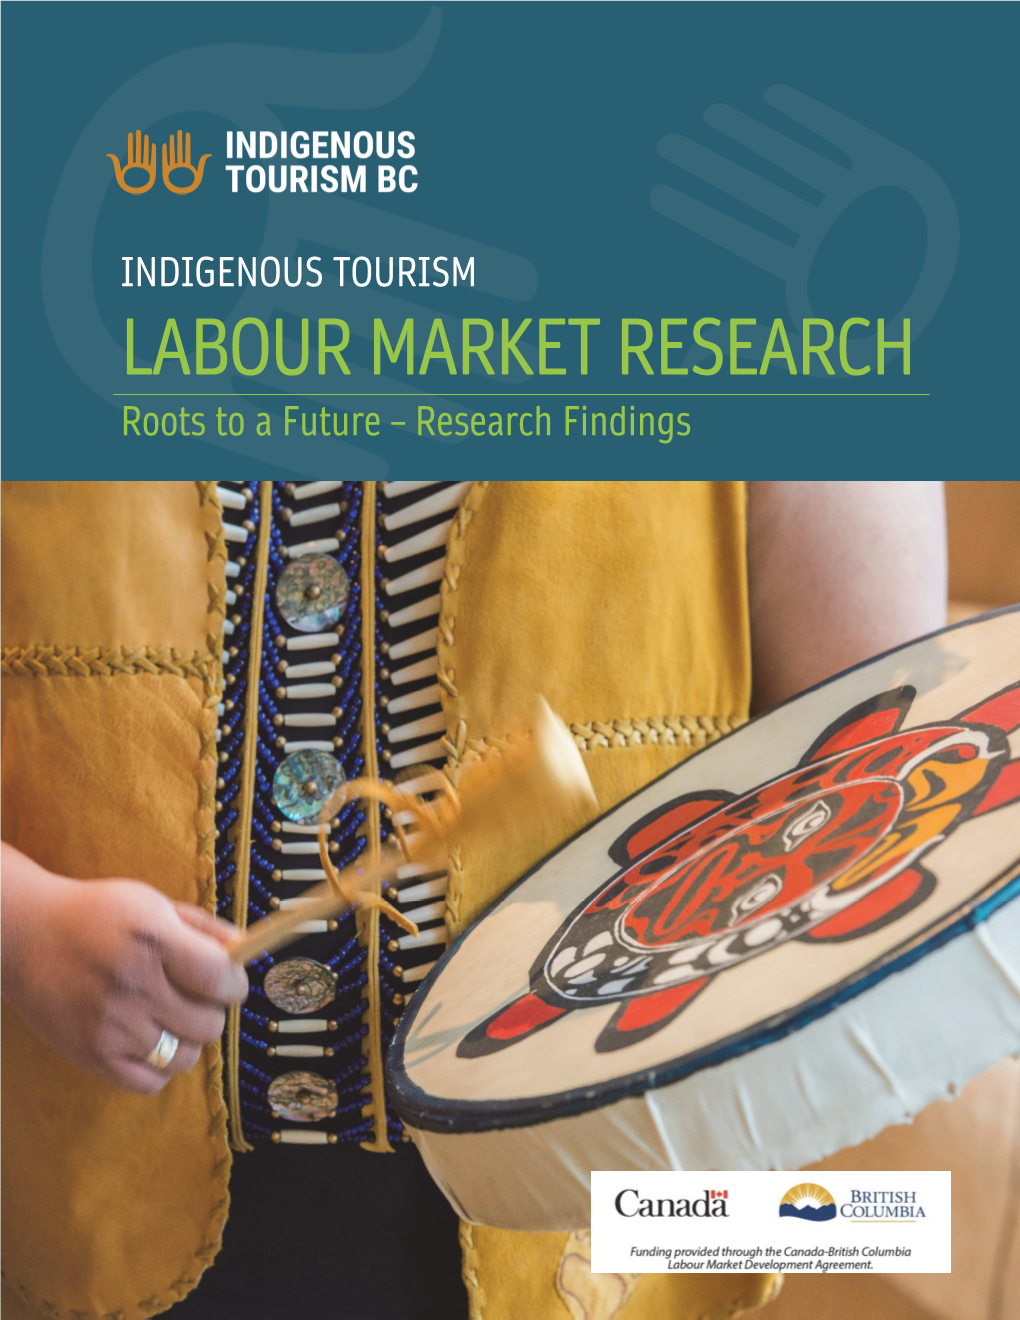 LABOUR MARKET RESEARCH Roots to a Future – Research Findings